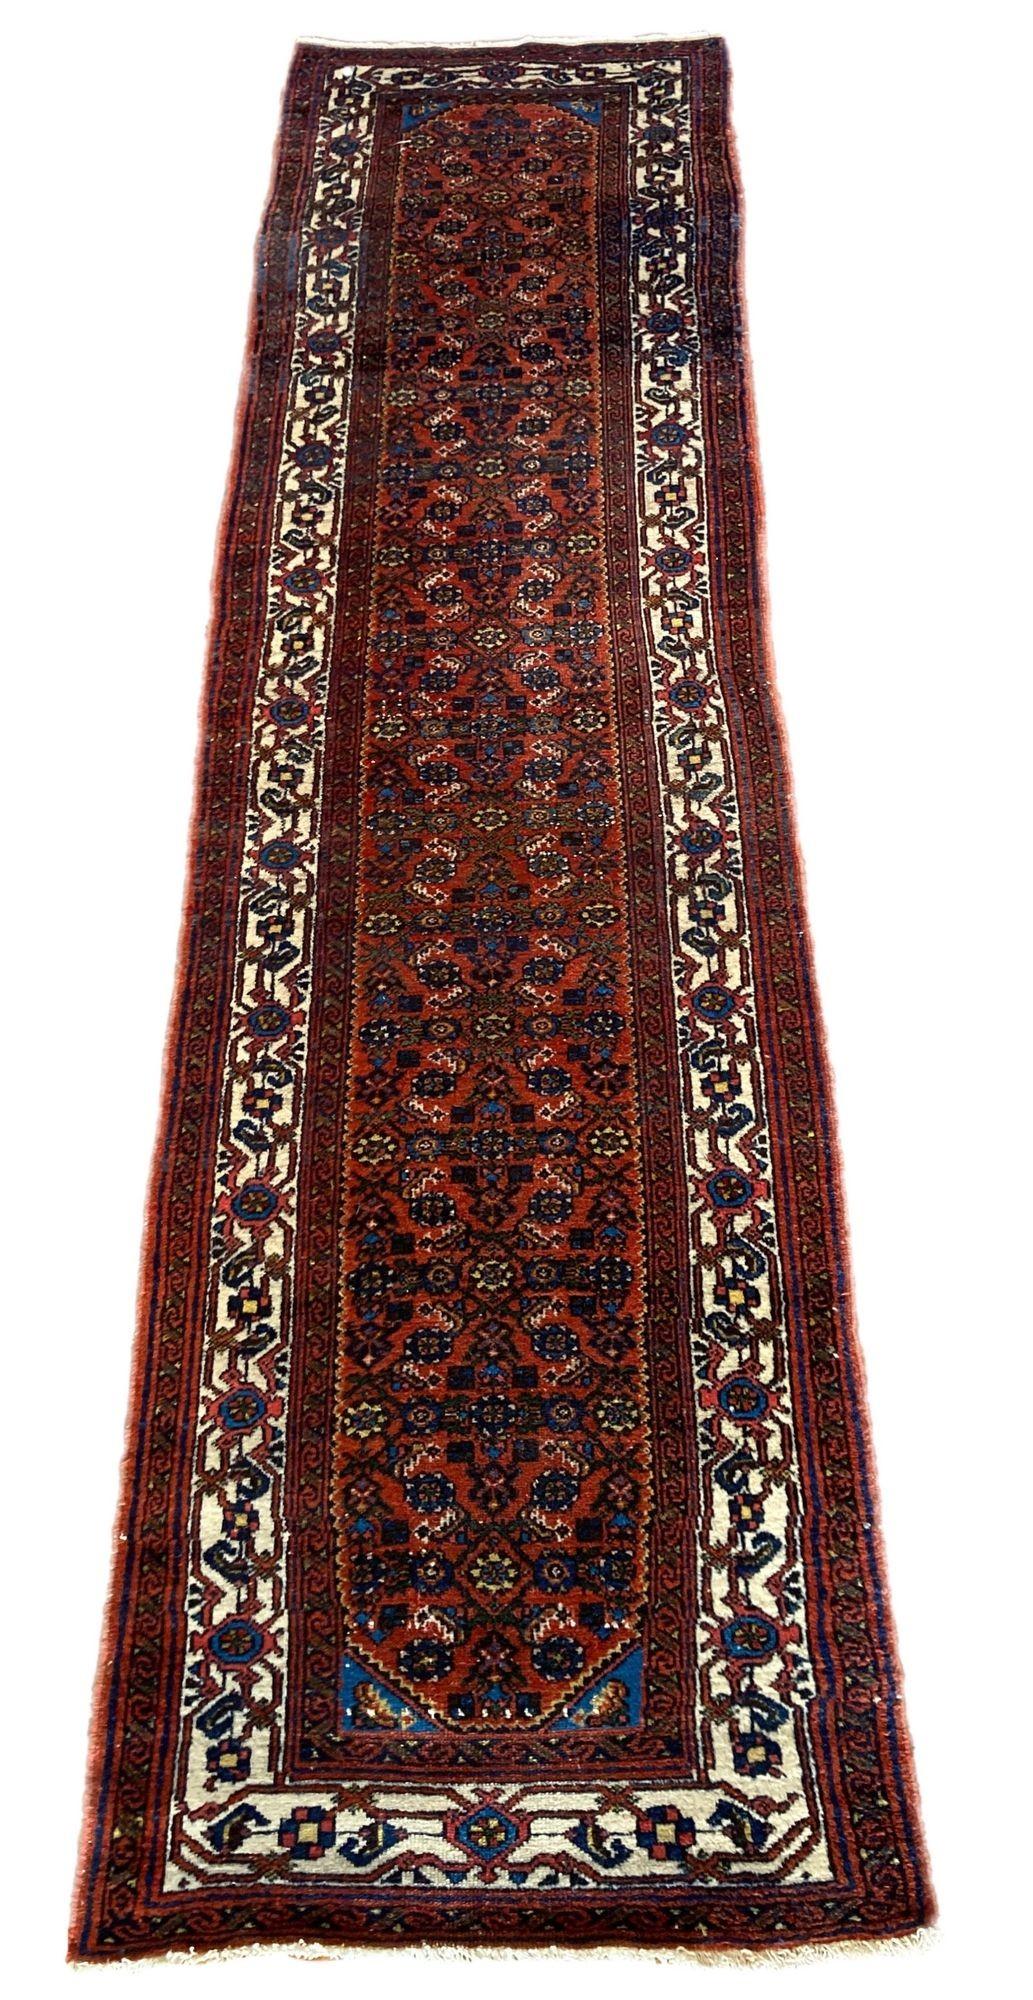 A beautiful vintage Hamadan runner, handwoven circa 1940 with a traditional Herati design on a terracotta field and ivory border. Lovely secondary colours of greens and golds and a good narrow size.
Size: 2.83m x 0.77m (9ft 4in x 2ft 6in)
This rug